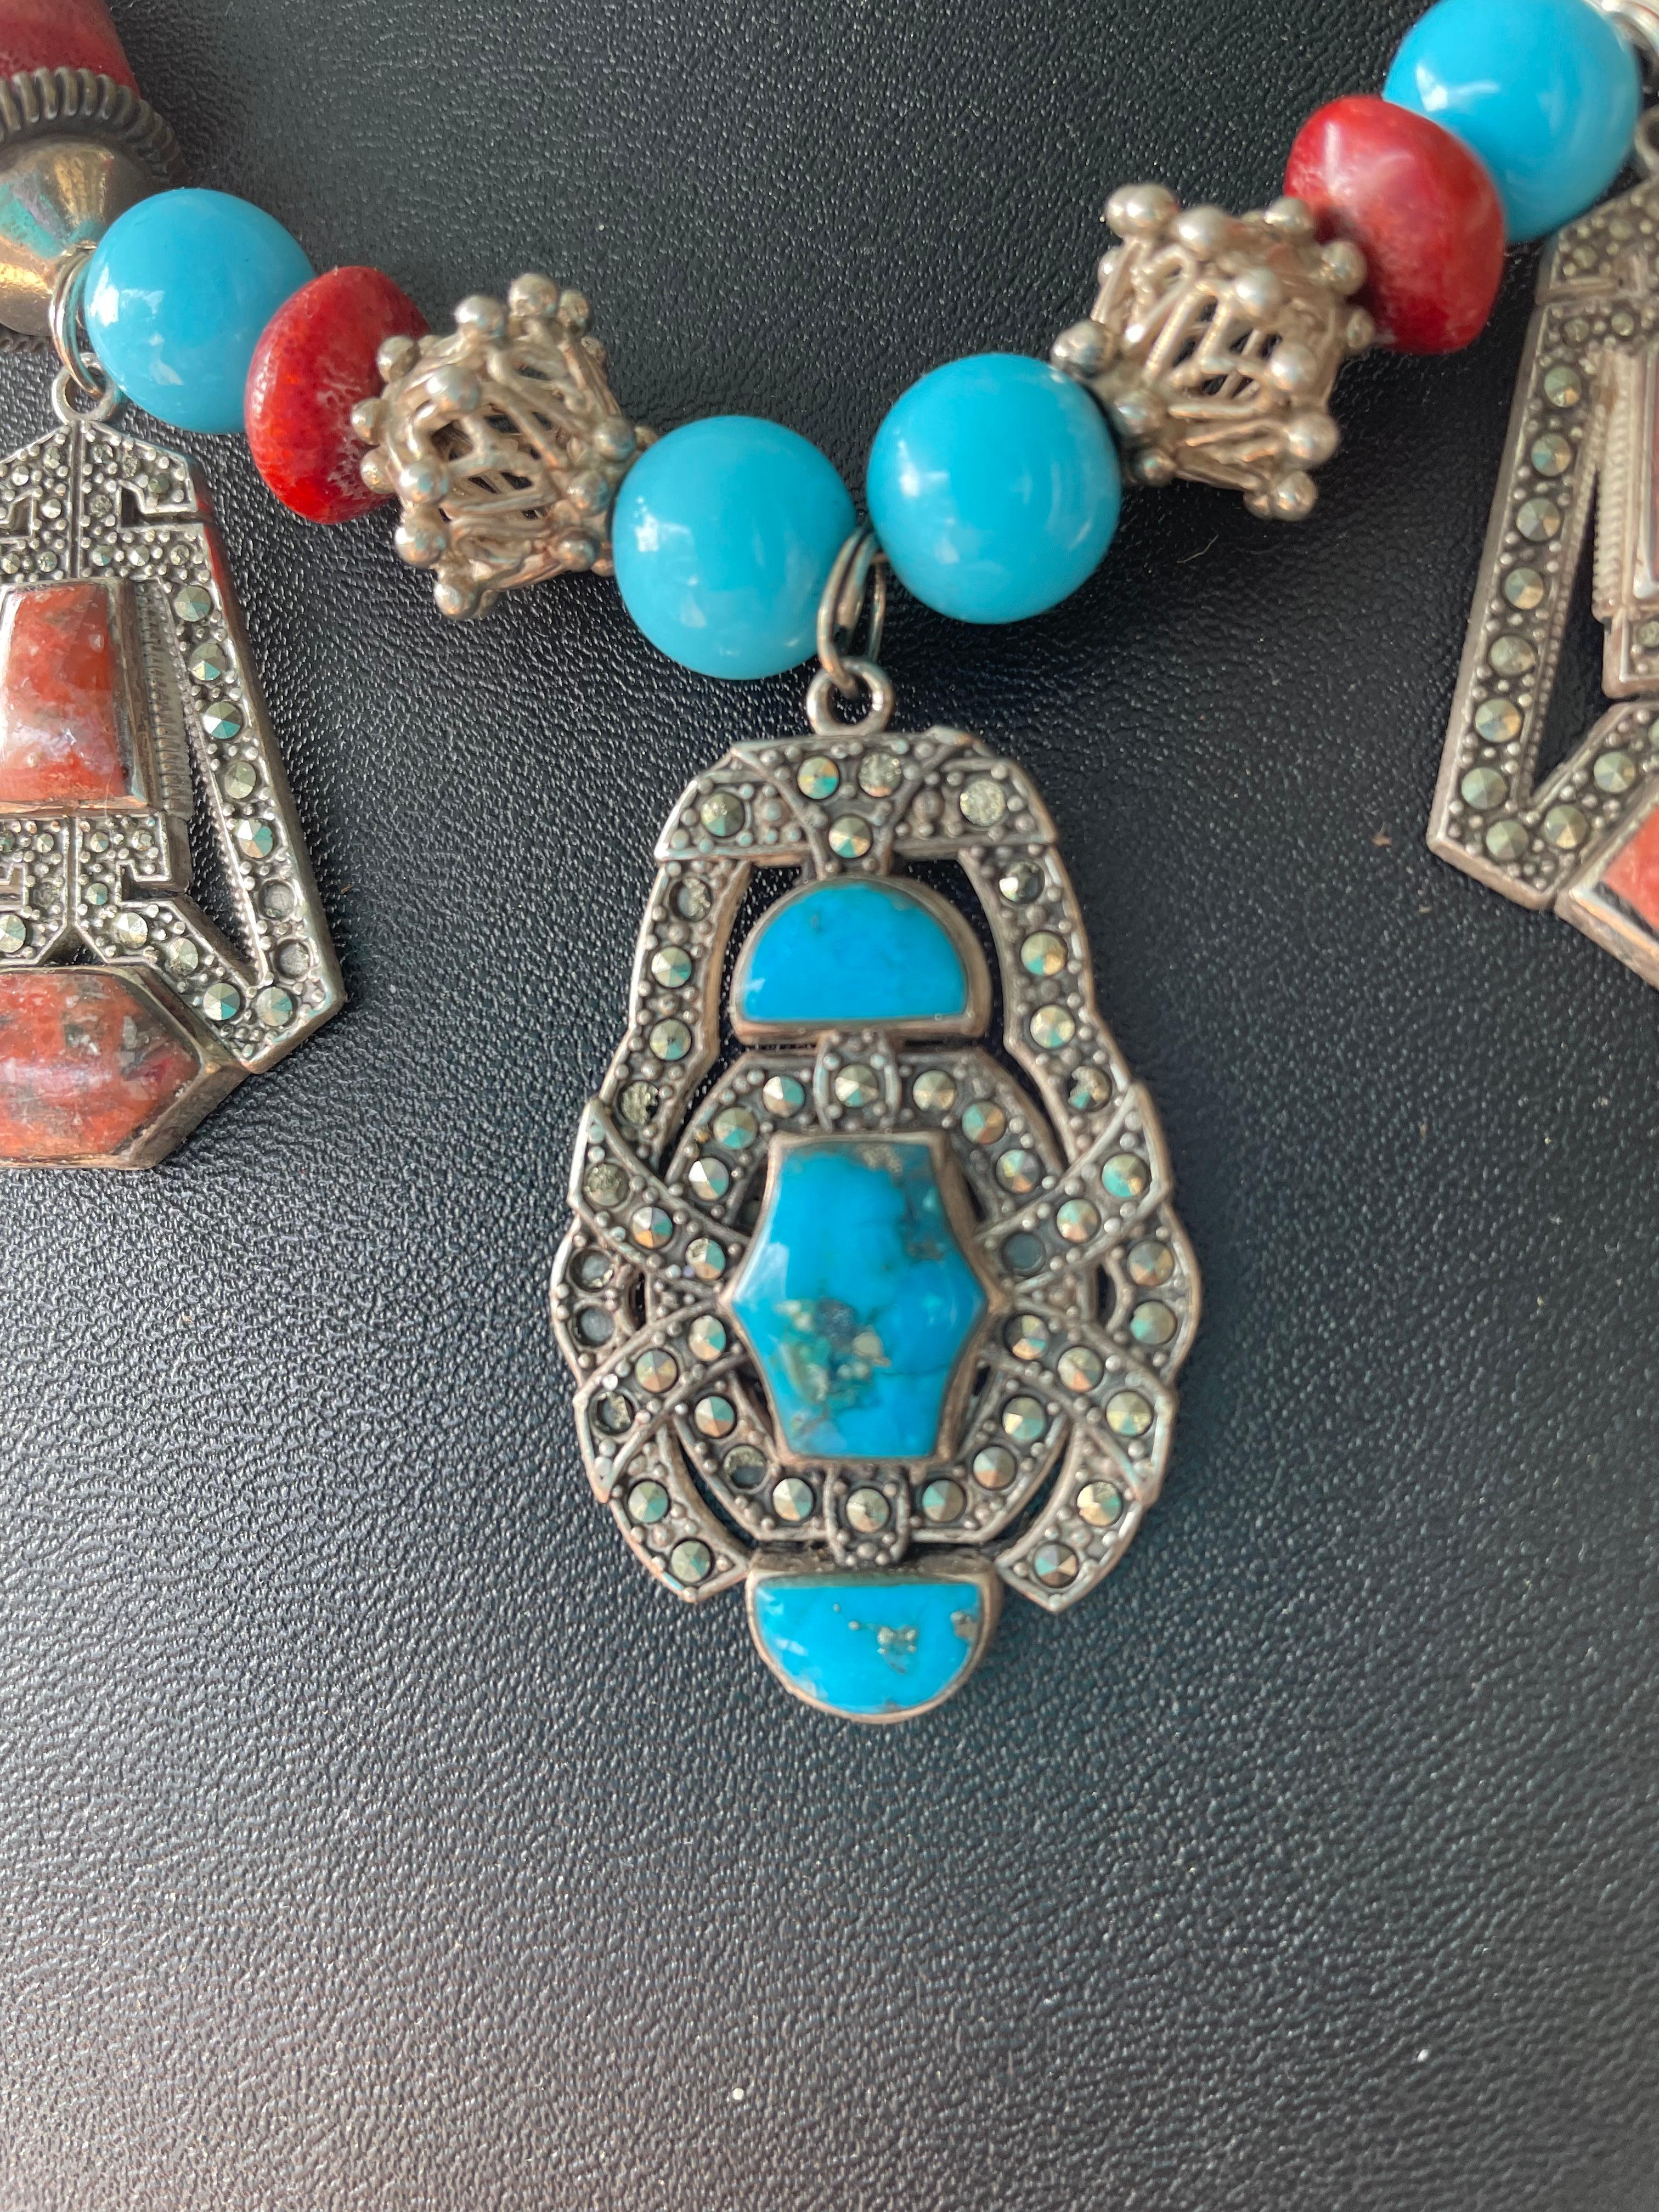 LB offers Art Deco style , triple vintage Mexican sterling , marcasite, coral and turquoise drops , handmade, one of a kind necklace. Vintage glass turquoise beads and Chinese coral ( with sterling silver filigree beads) enhance these highly unusual